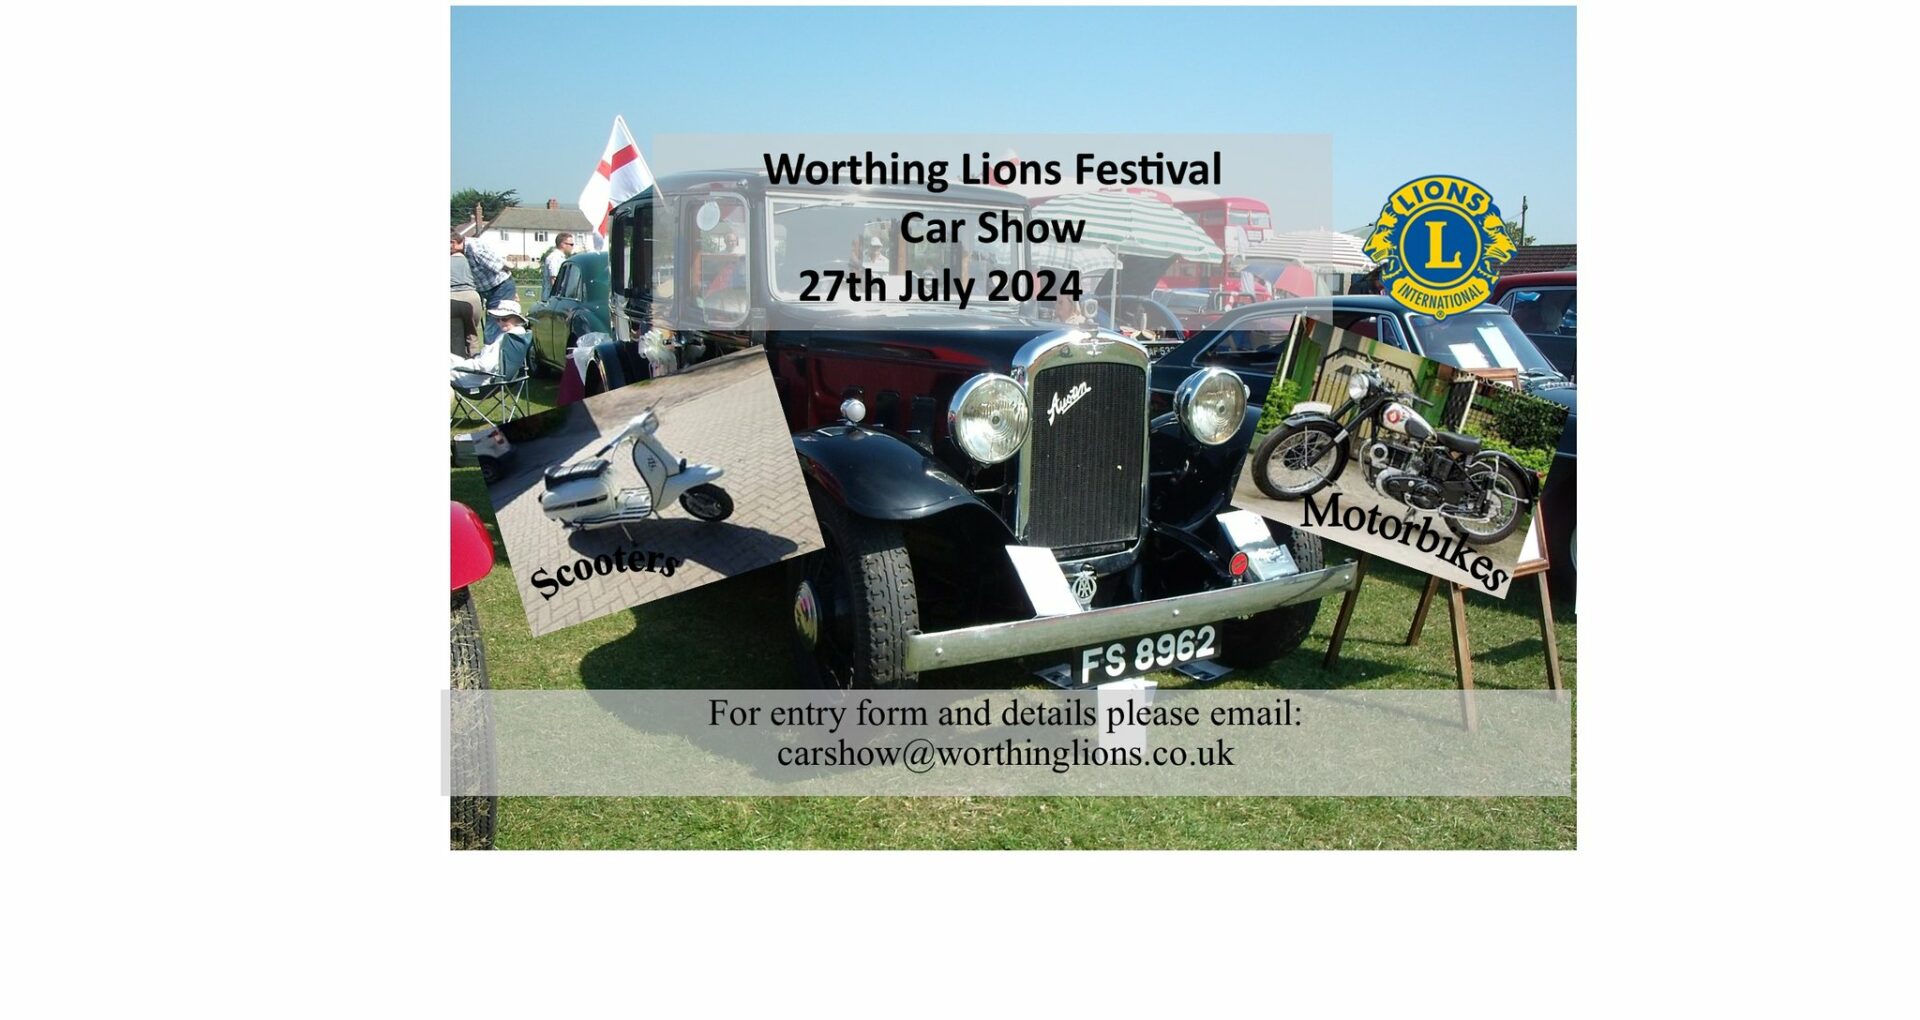 Worthing Lions Festival Car Show